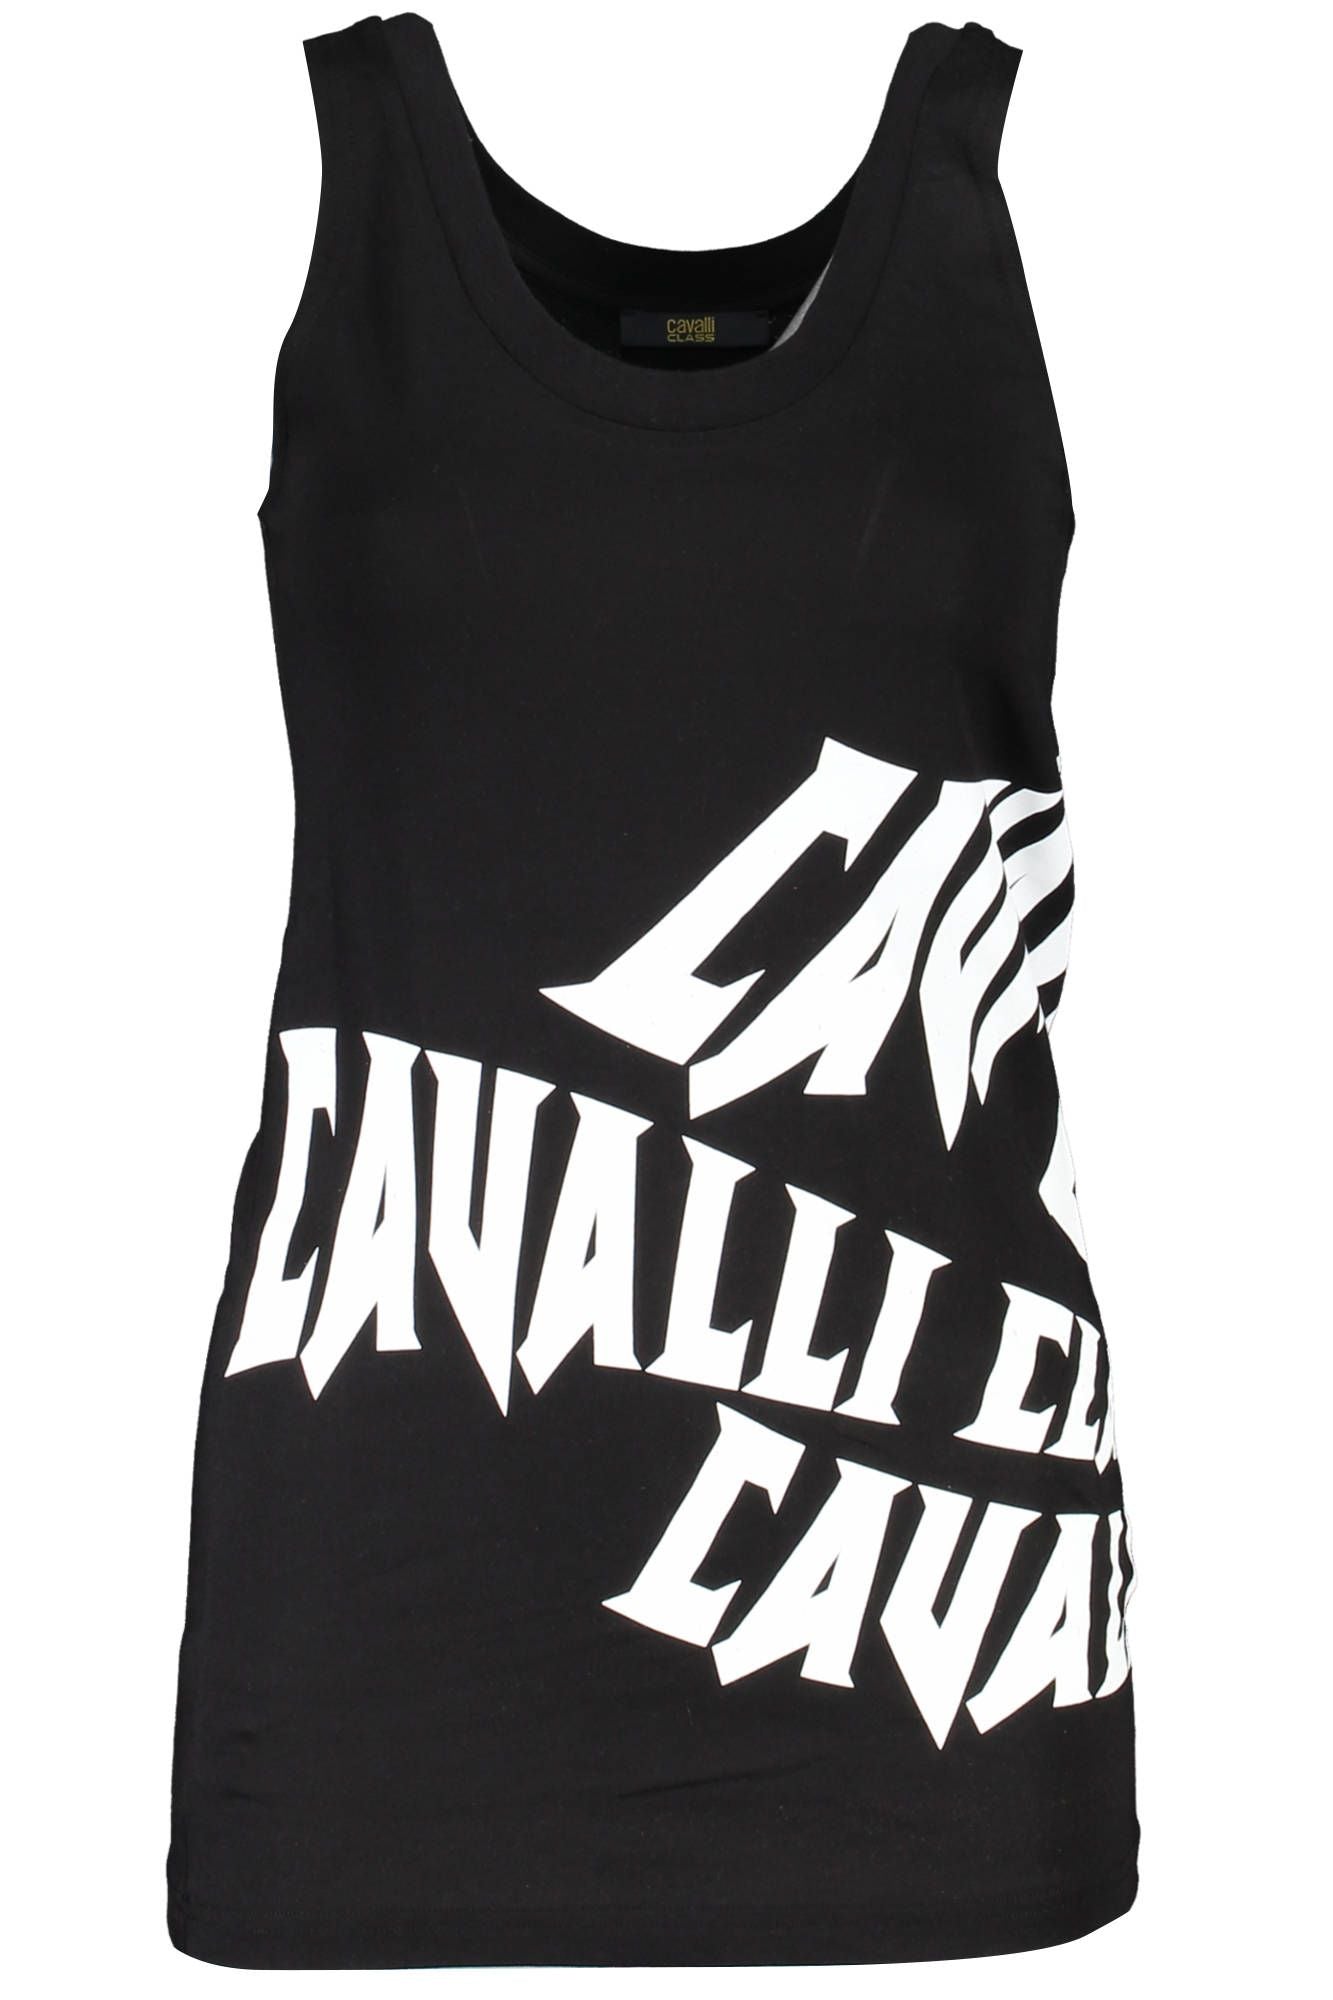 Cavalli Class Chic Wide-Shouldered Printed Tank Top